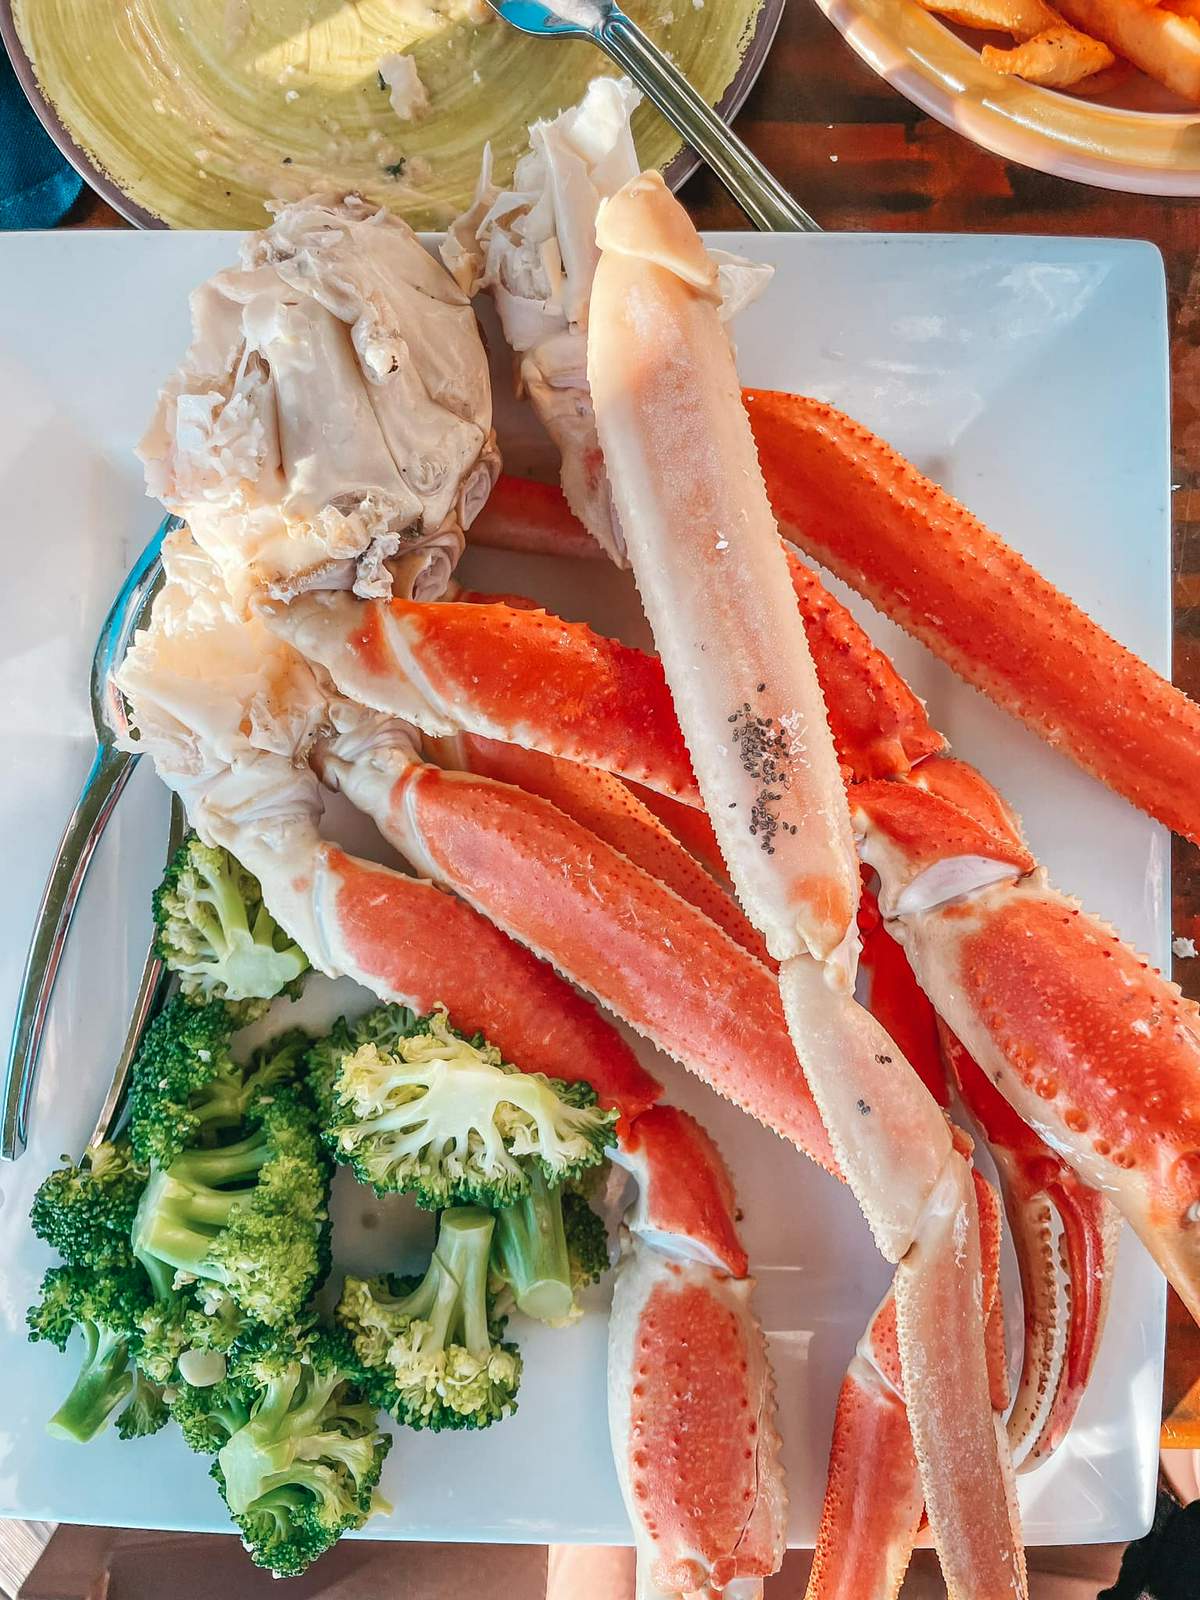 Alaskan snow crab legs and broccoli from Jimmy's Fish House on Clearwater Beach